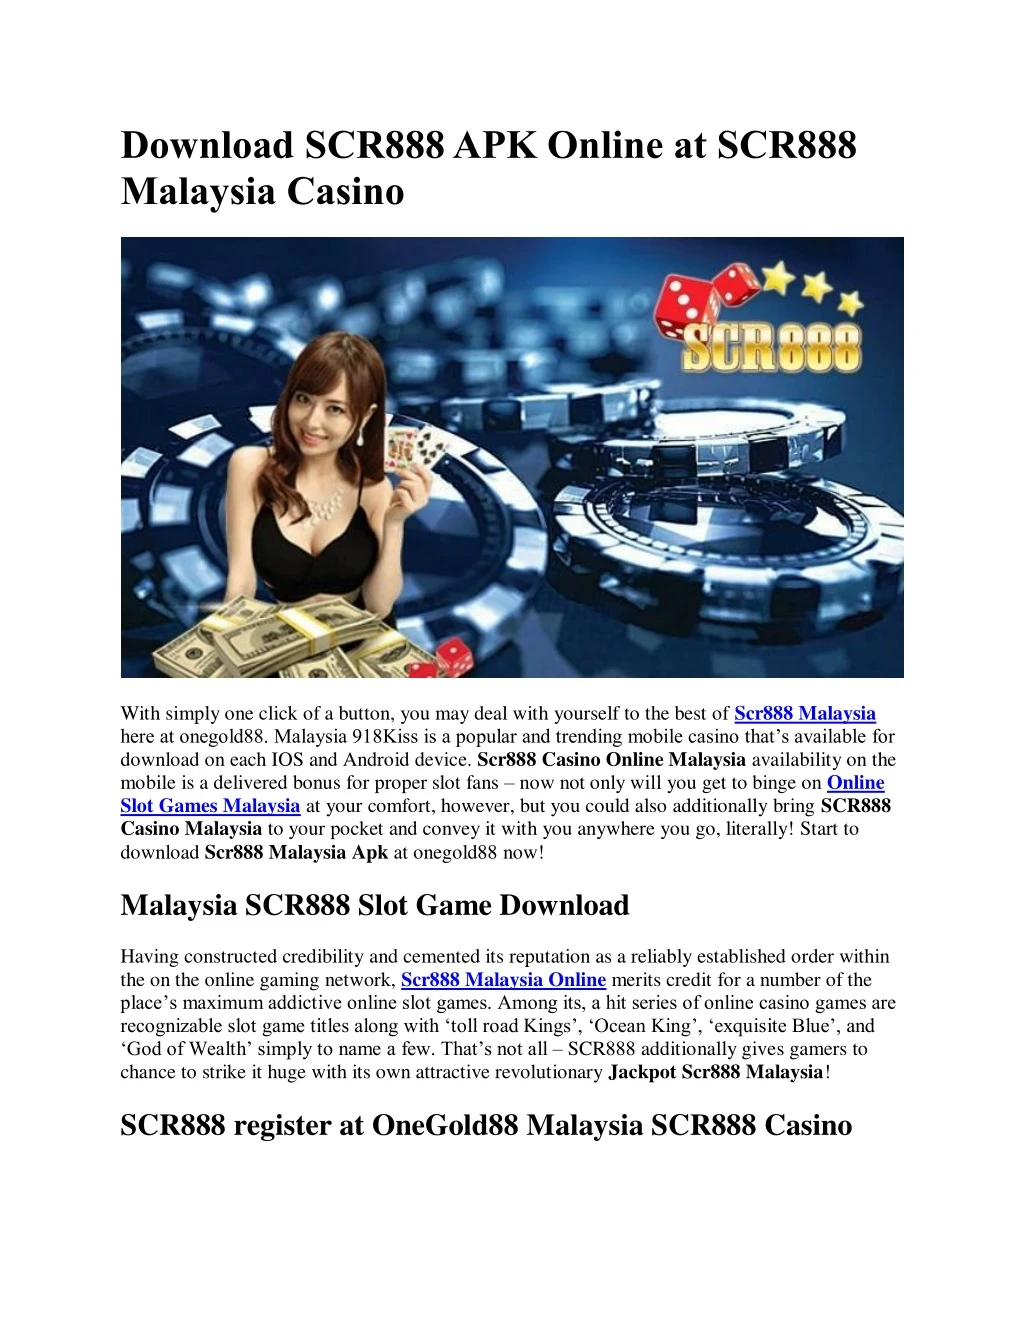 download scr888 apk online at scr888 malaysia